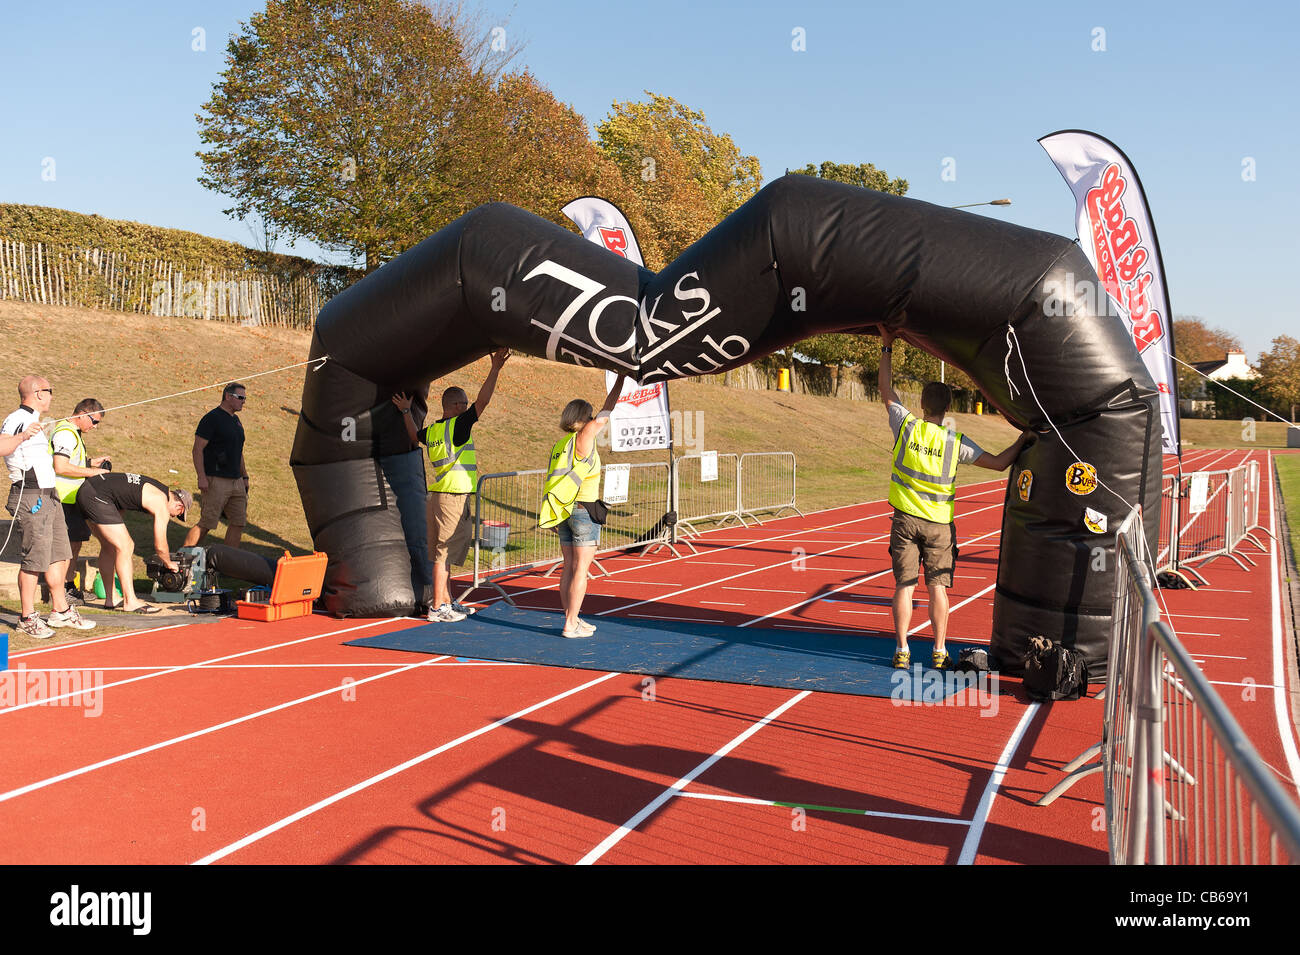 Hot sunny day makes fan overheat resulting in a deflating finishing point to a triathlon, supporters hold it up for last runners Stock Photo